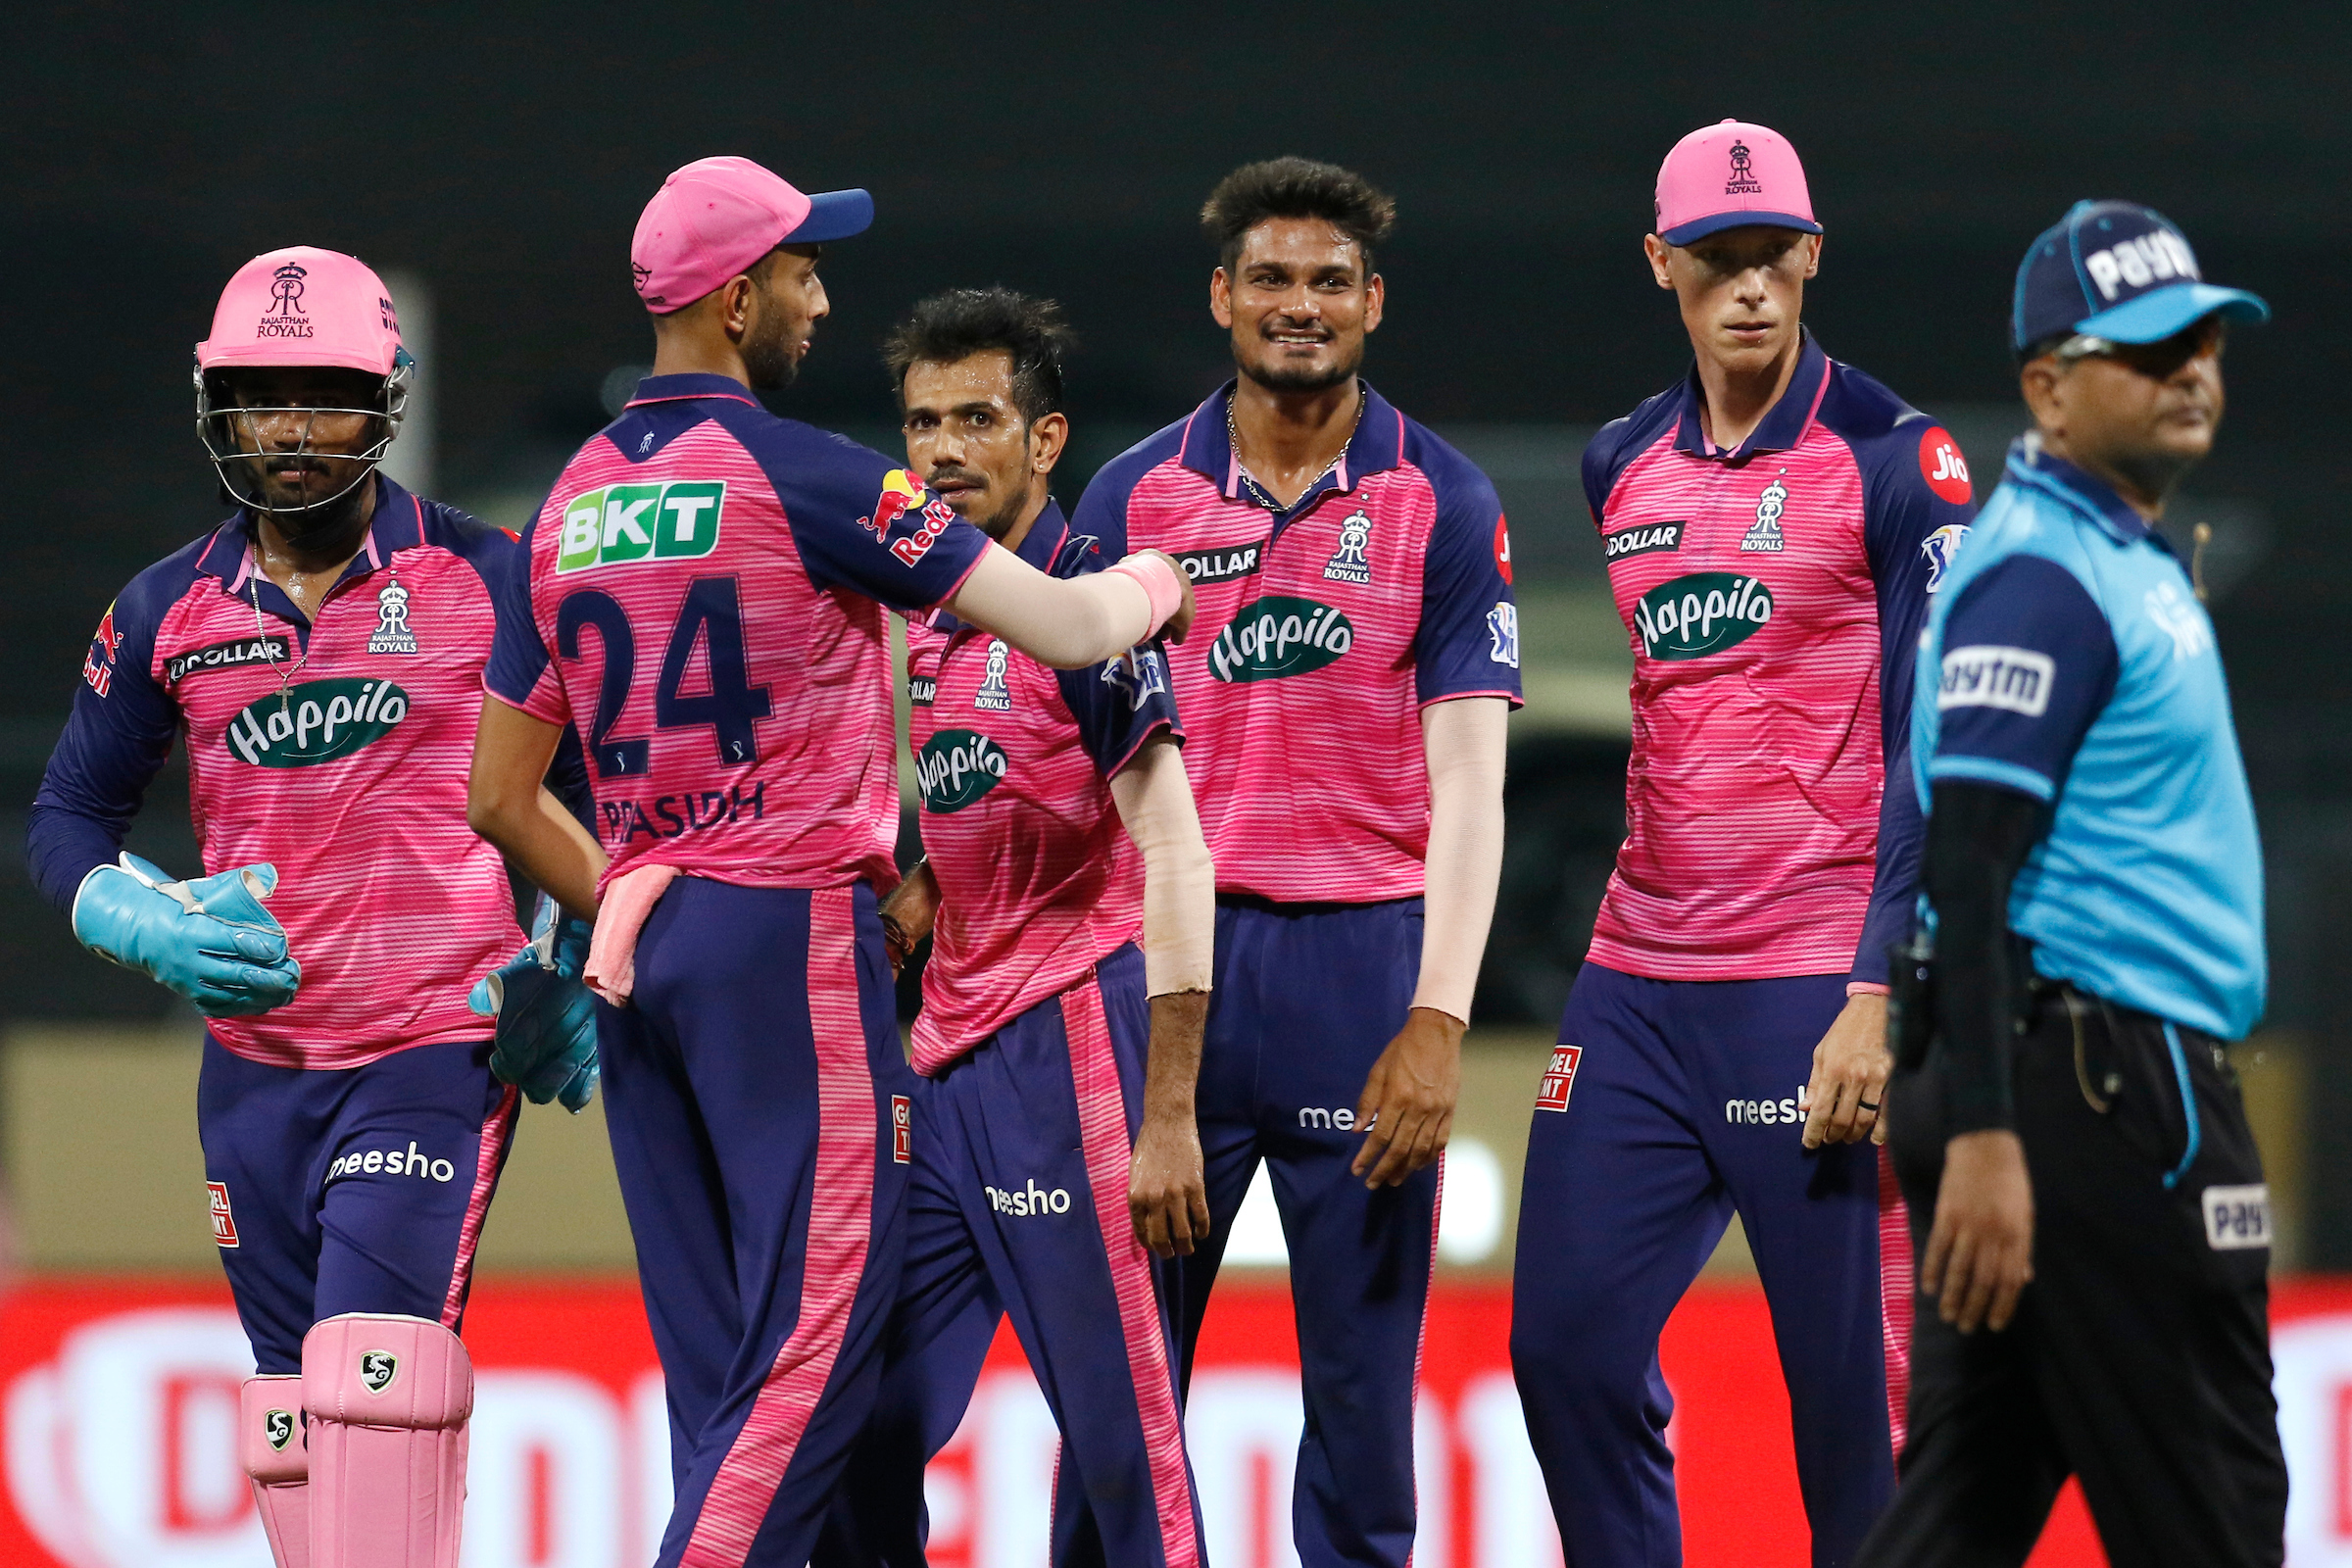 LSG vs RR LIVE Score: Lucknow, Rajasthan eye win to SEAL playoffs spot, top 2 place also on the line - Follow LSG vs RR Ball by Ball updates